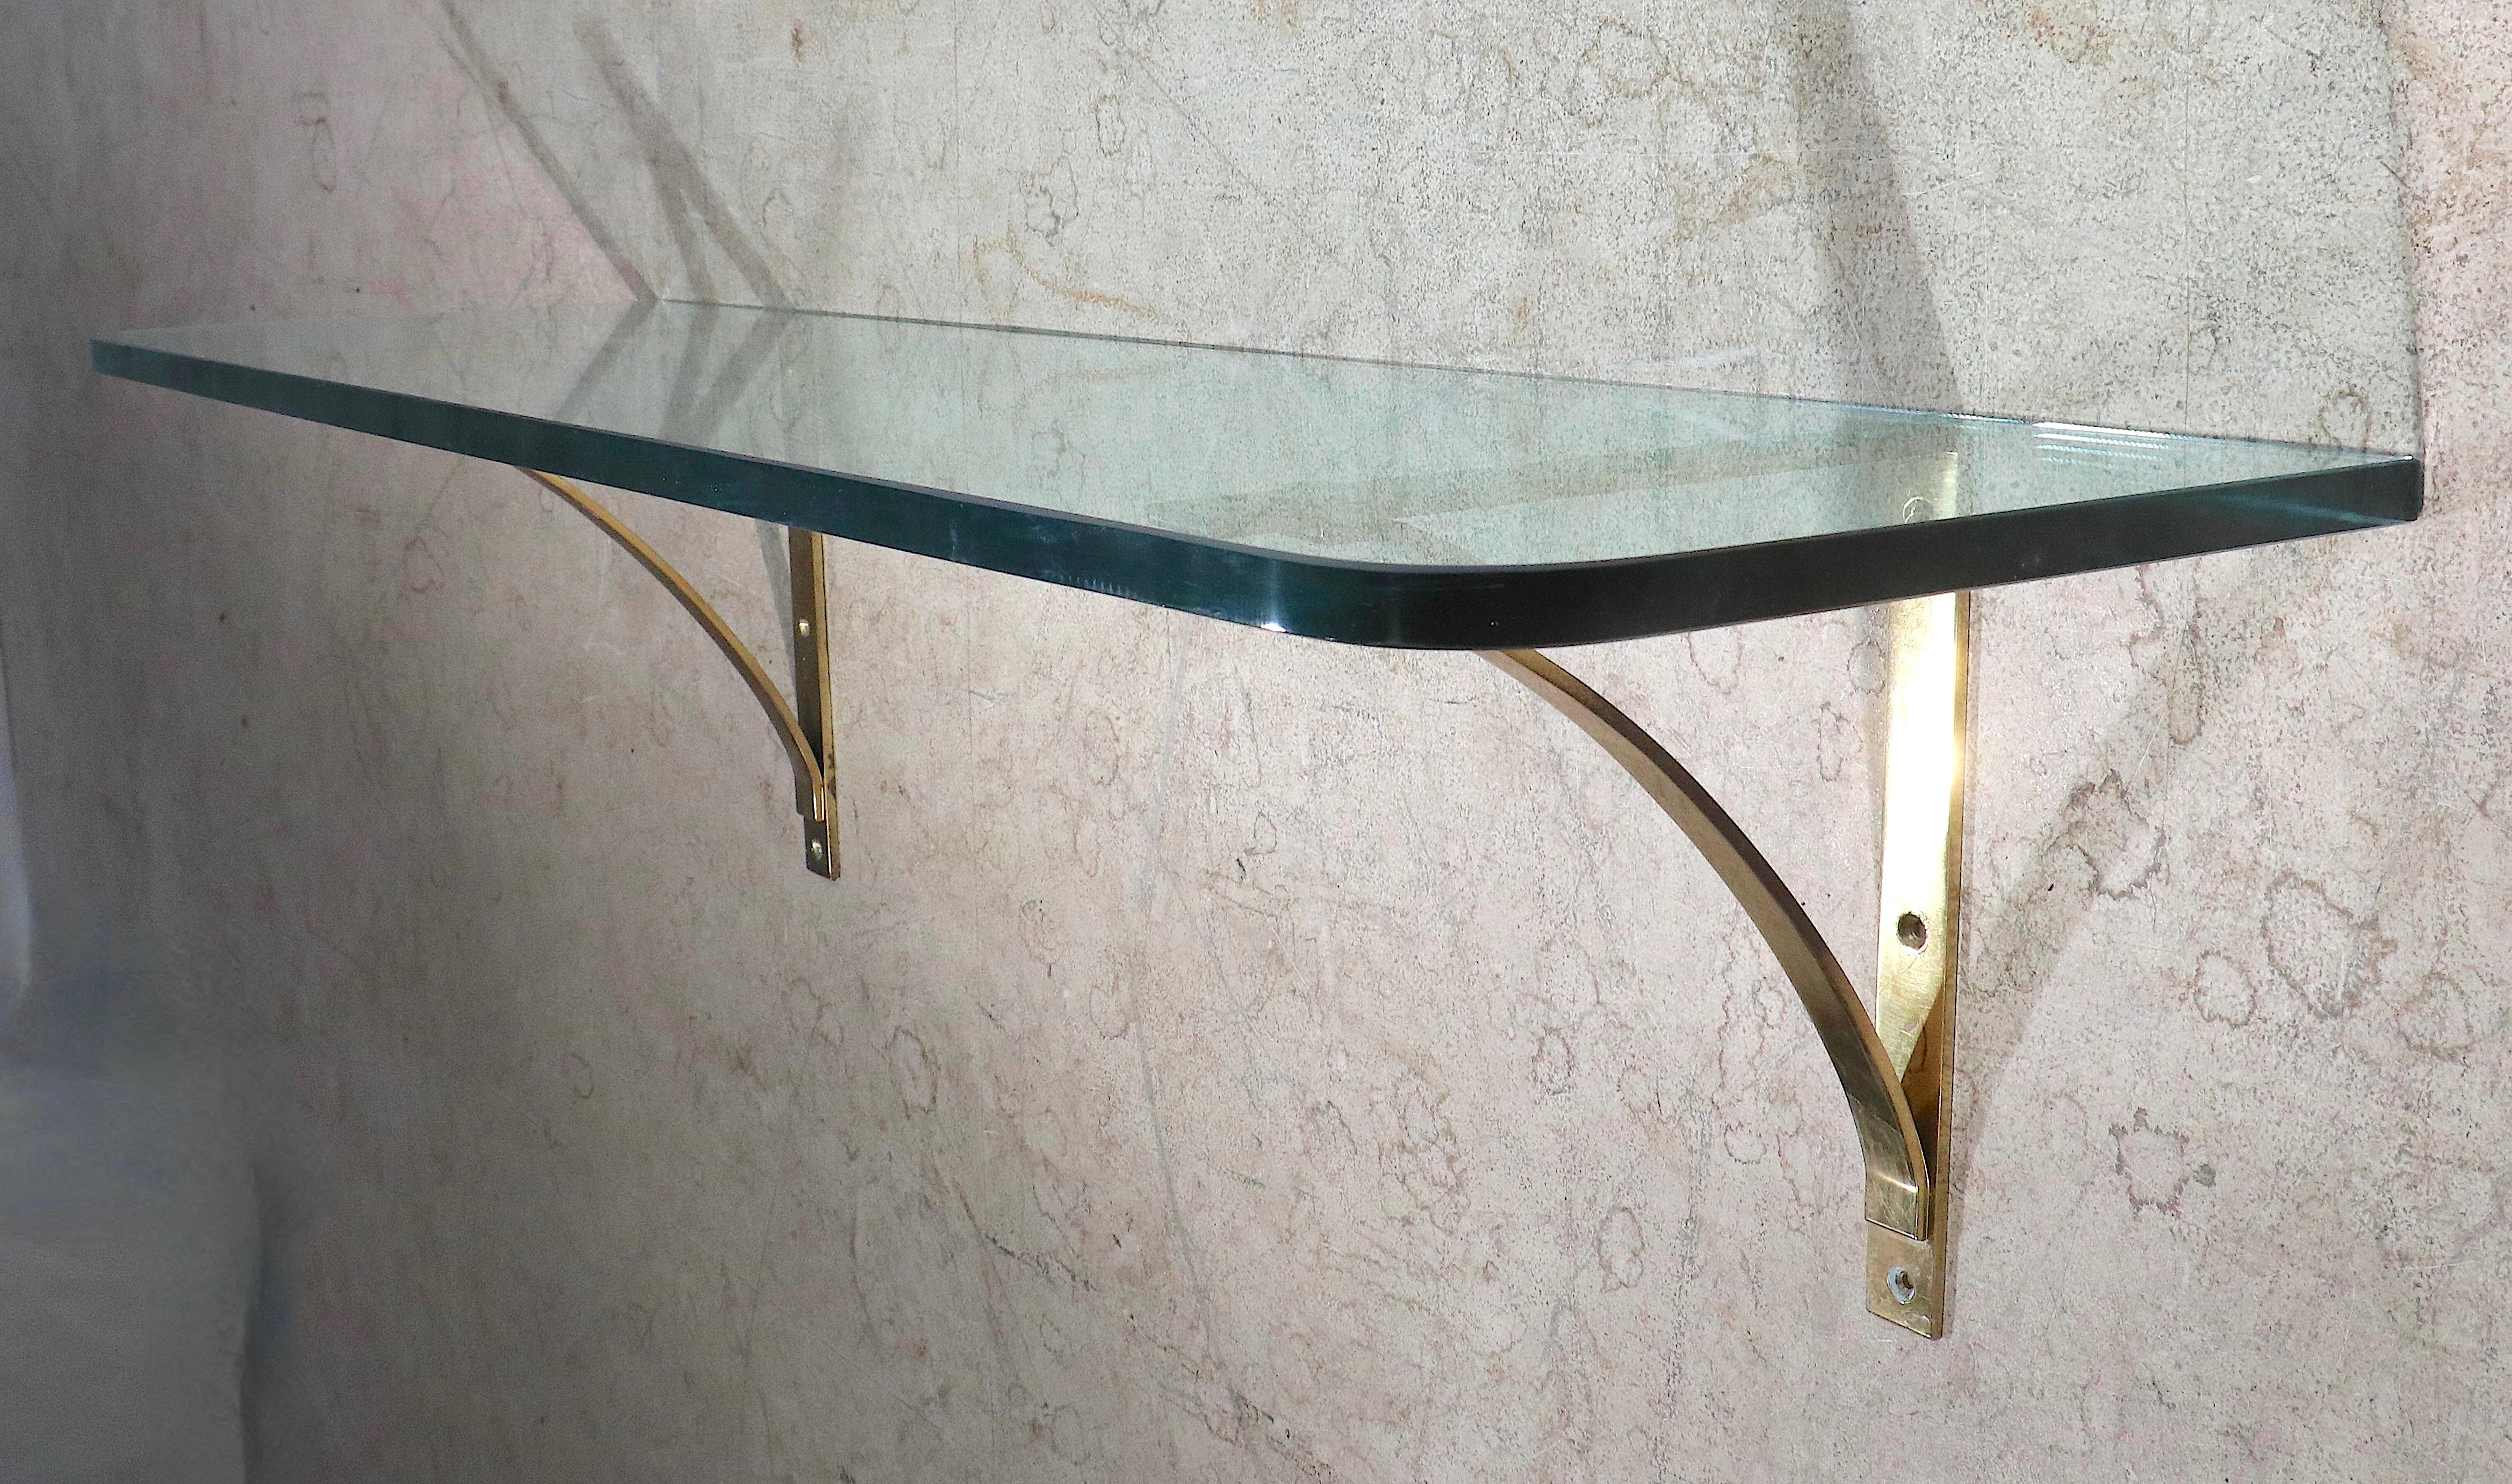 Post Modern Plate Glass and Brass Wall Mount Shelf, C. 1970's For Sale 5